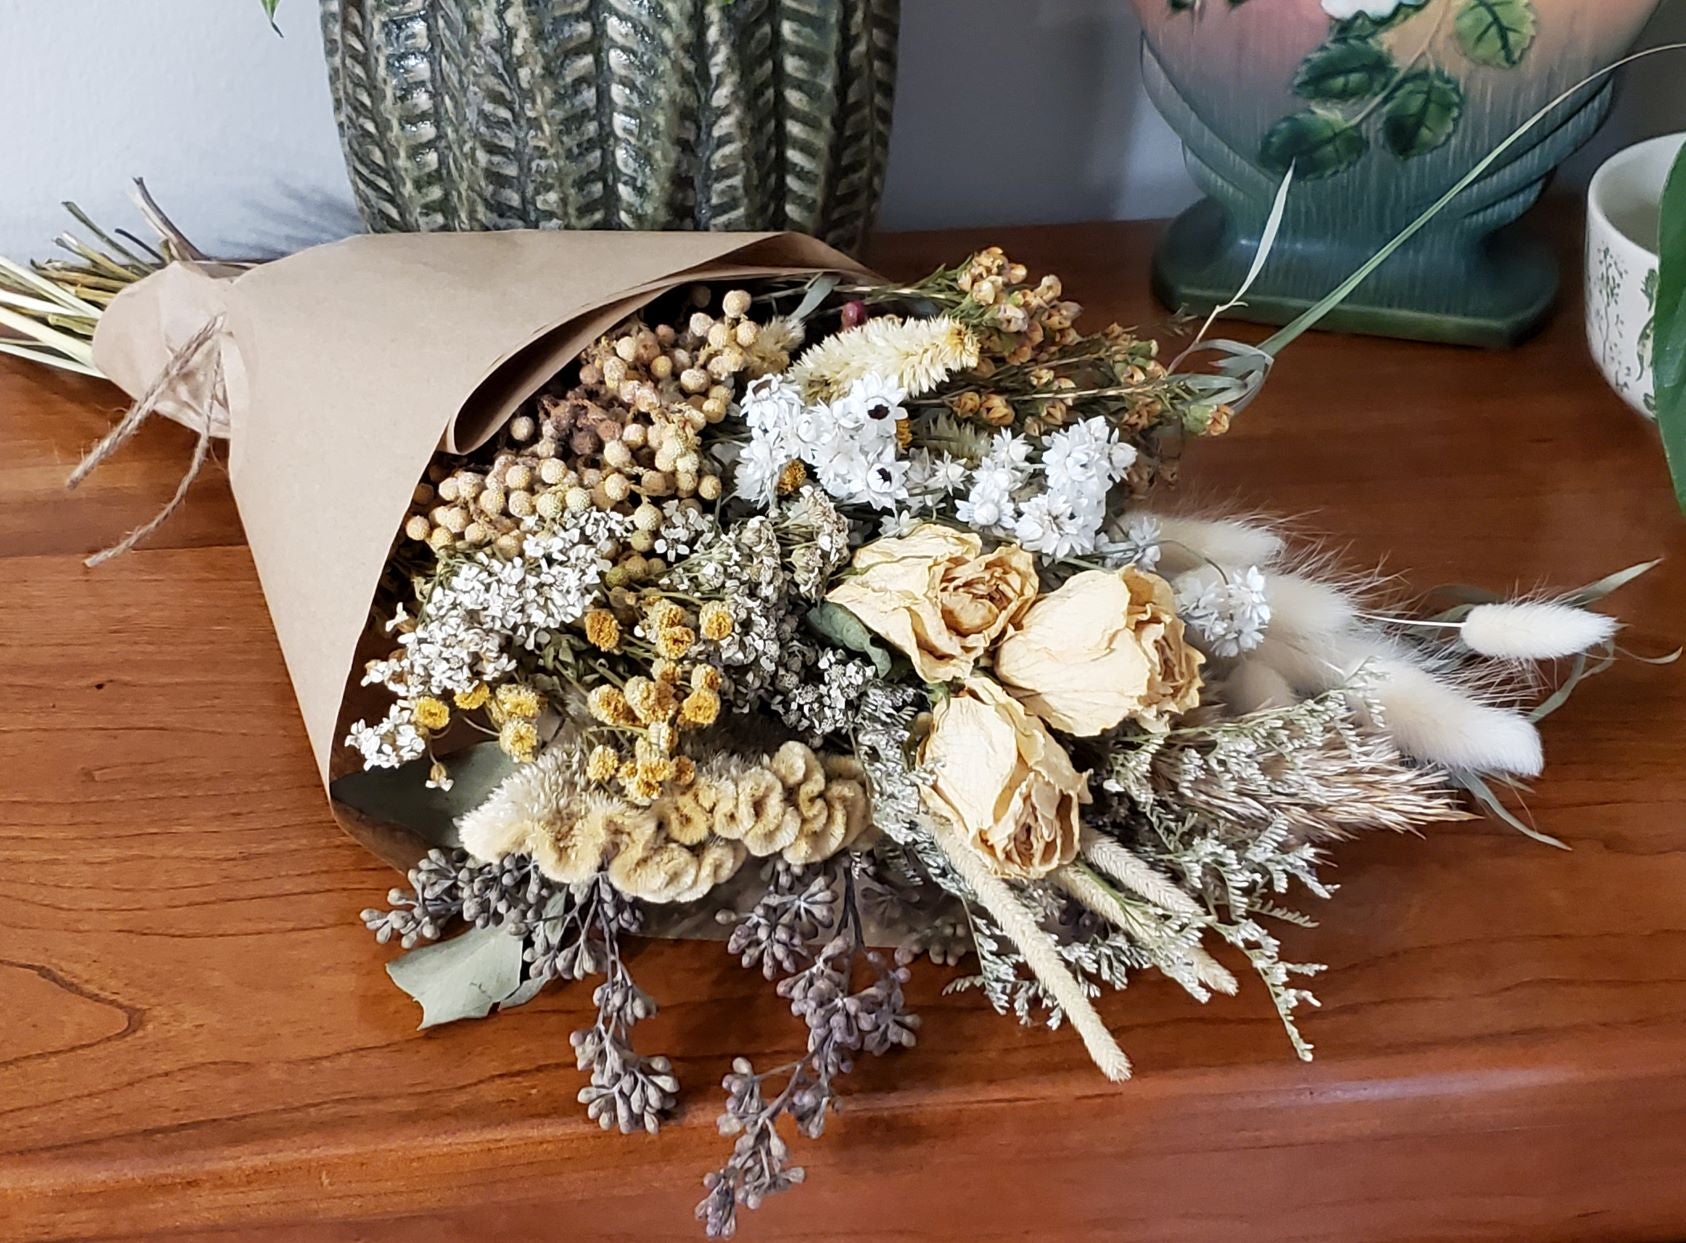 Bouquet Wrapping 